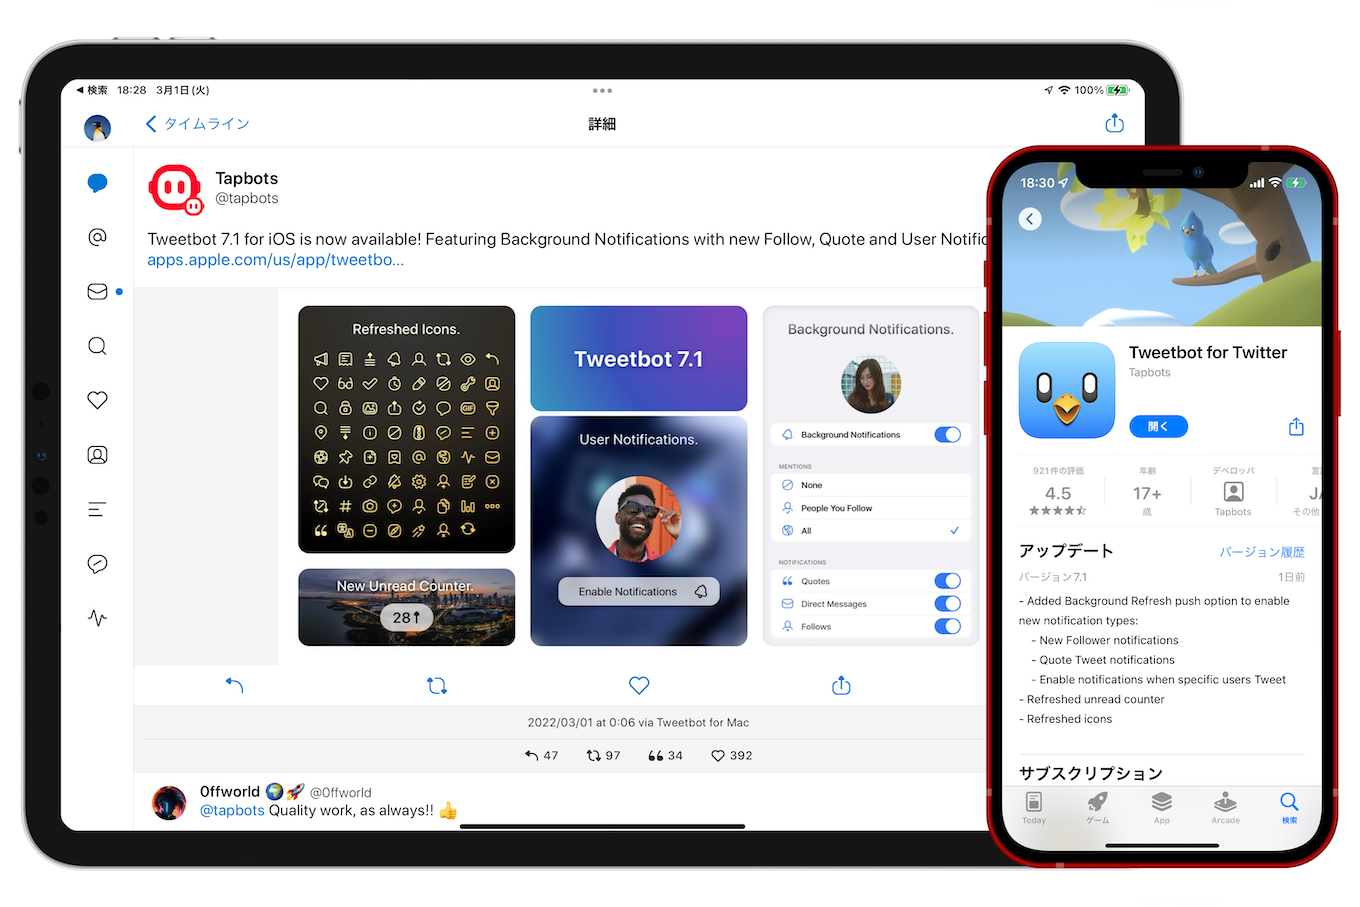 Tweetbot 7.1 for iOS